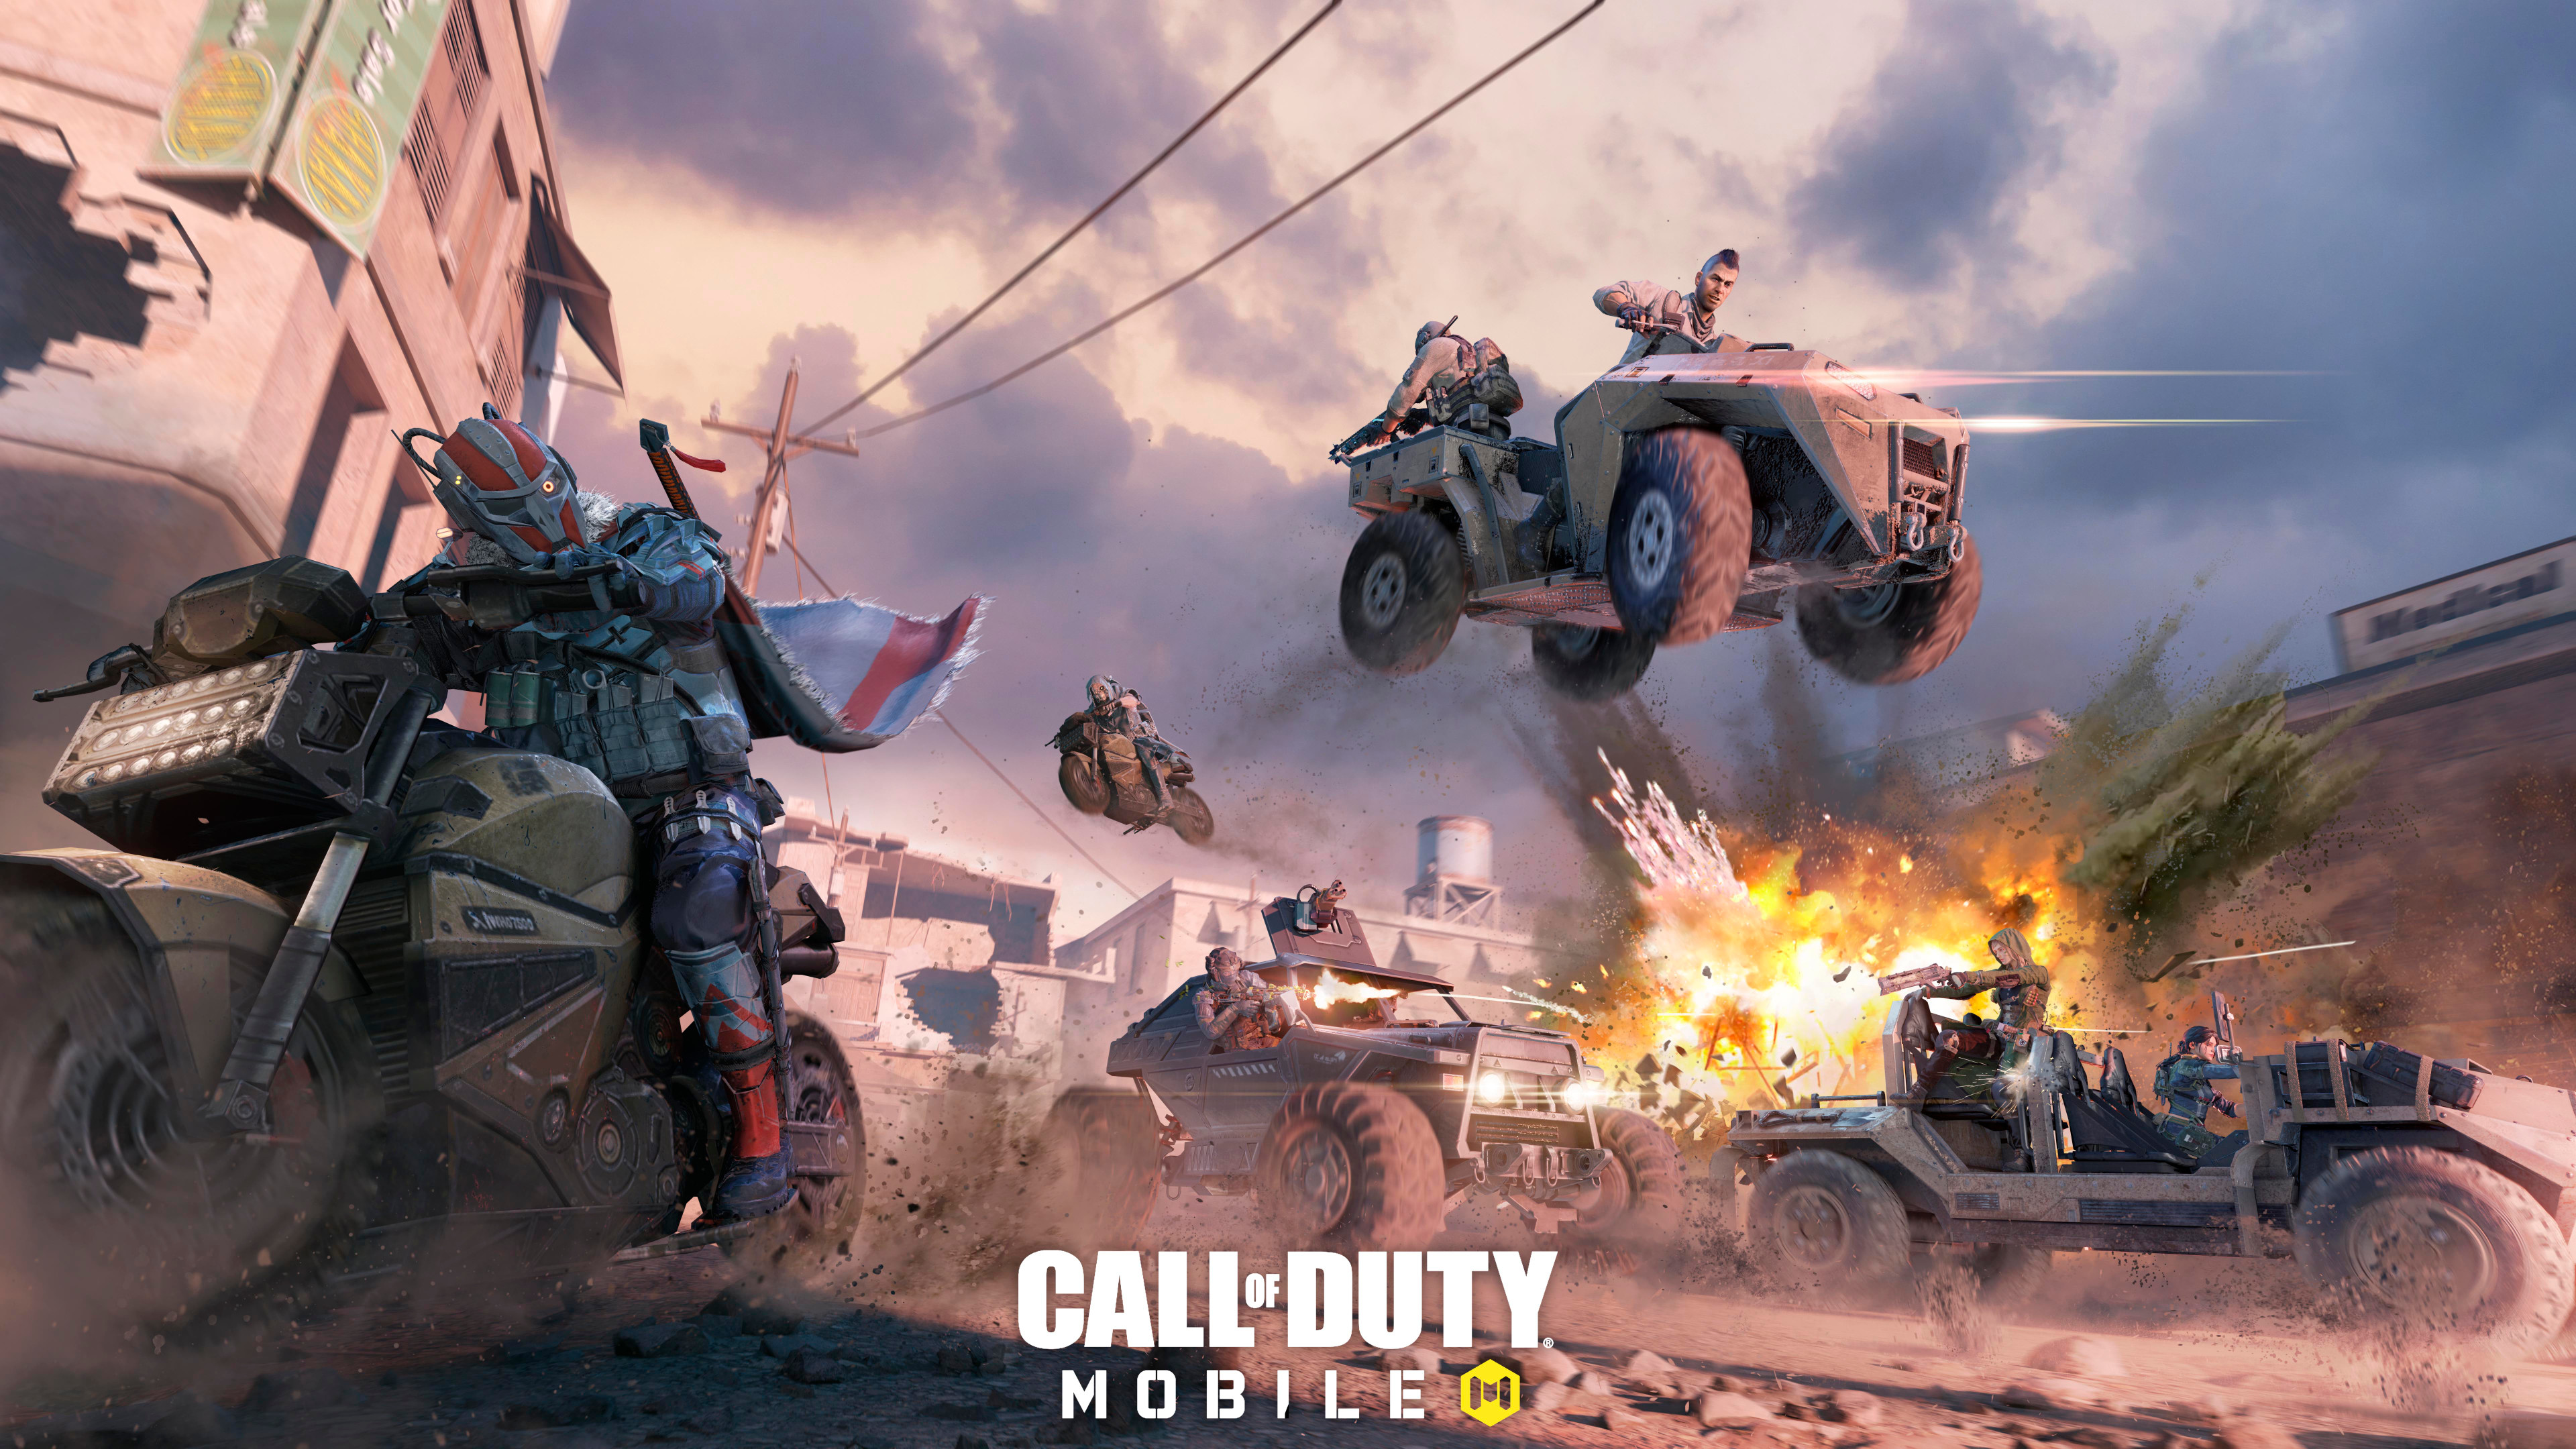 call of duty: mobile, video game, atv, motorcycle, vehicle